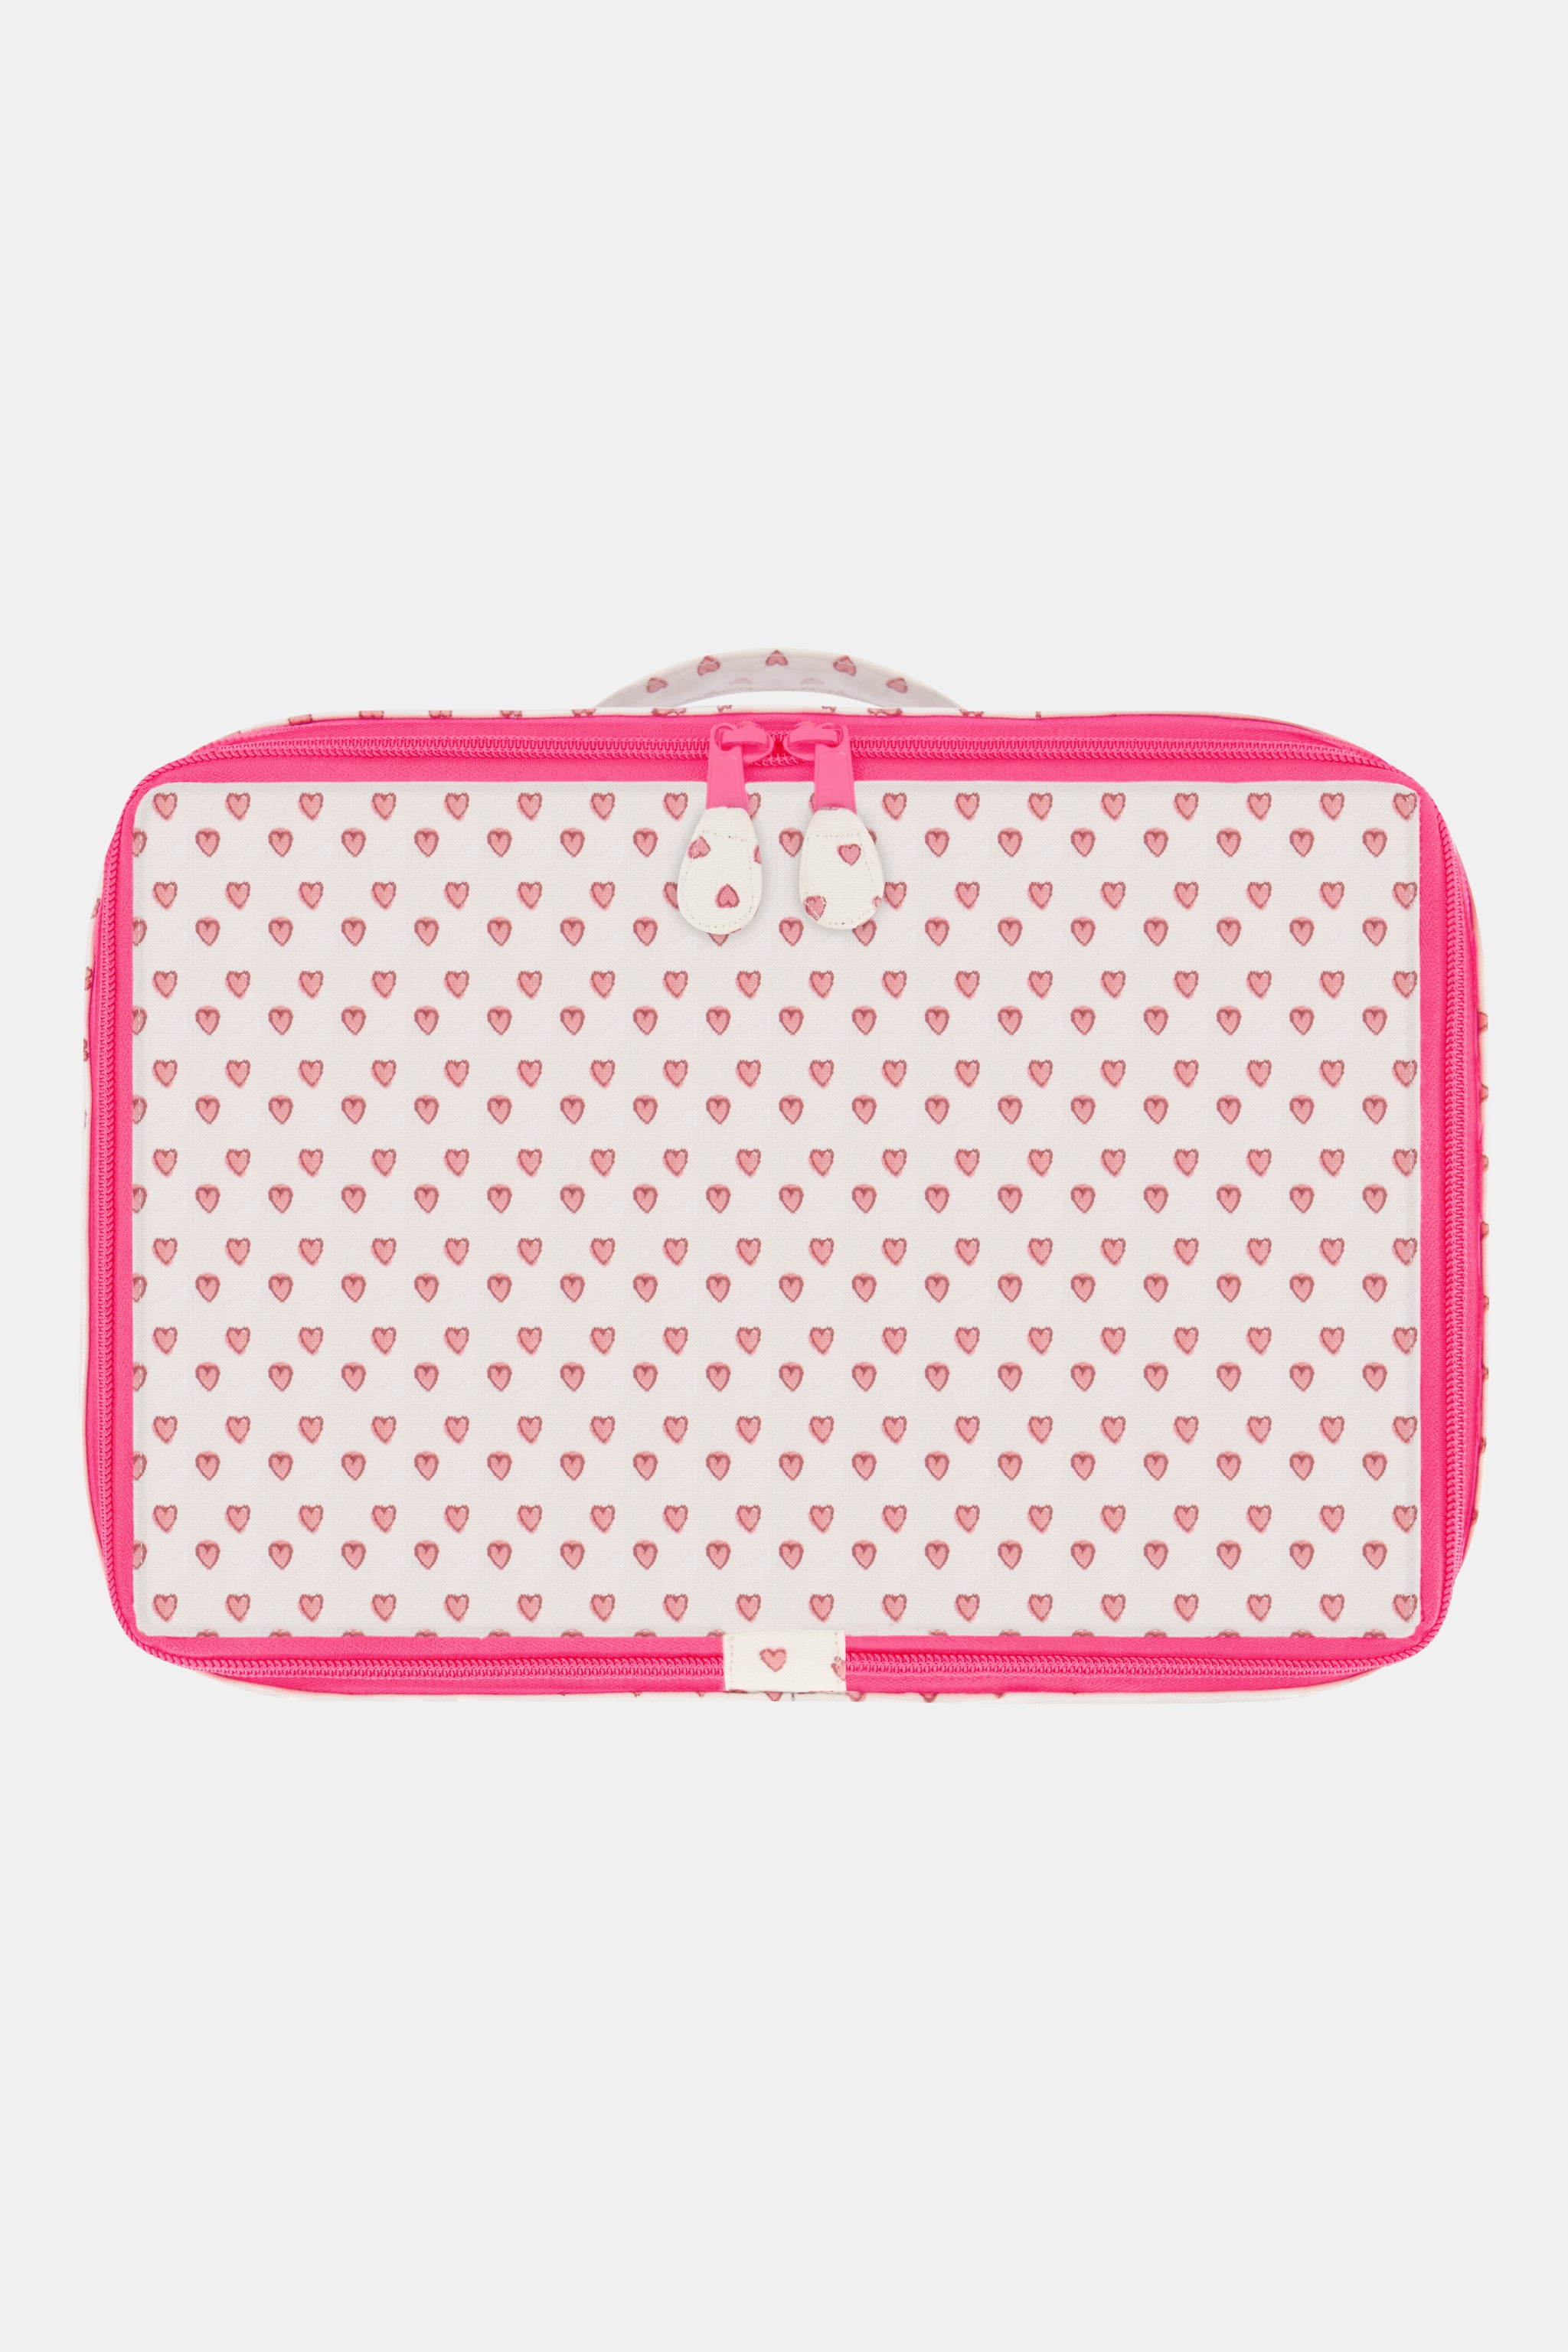 Playful Hearts Cosmetic Bag Trio - Mini Macarons Boutique